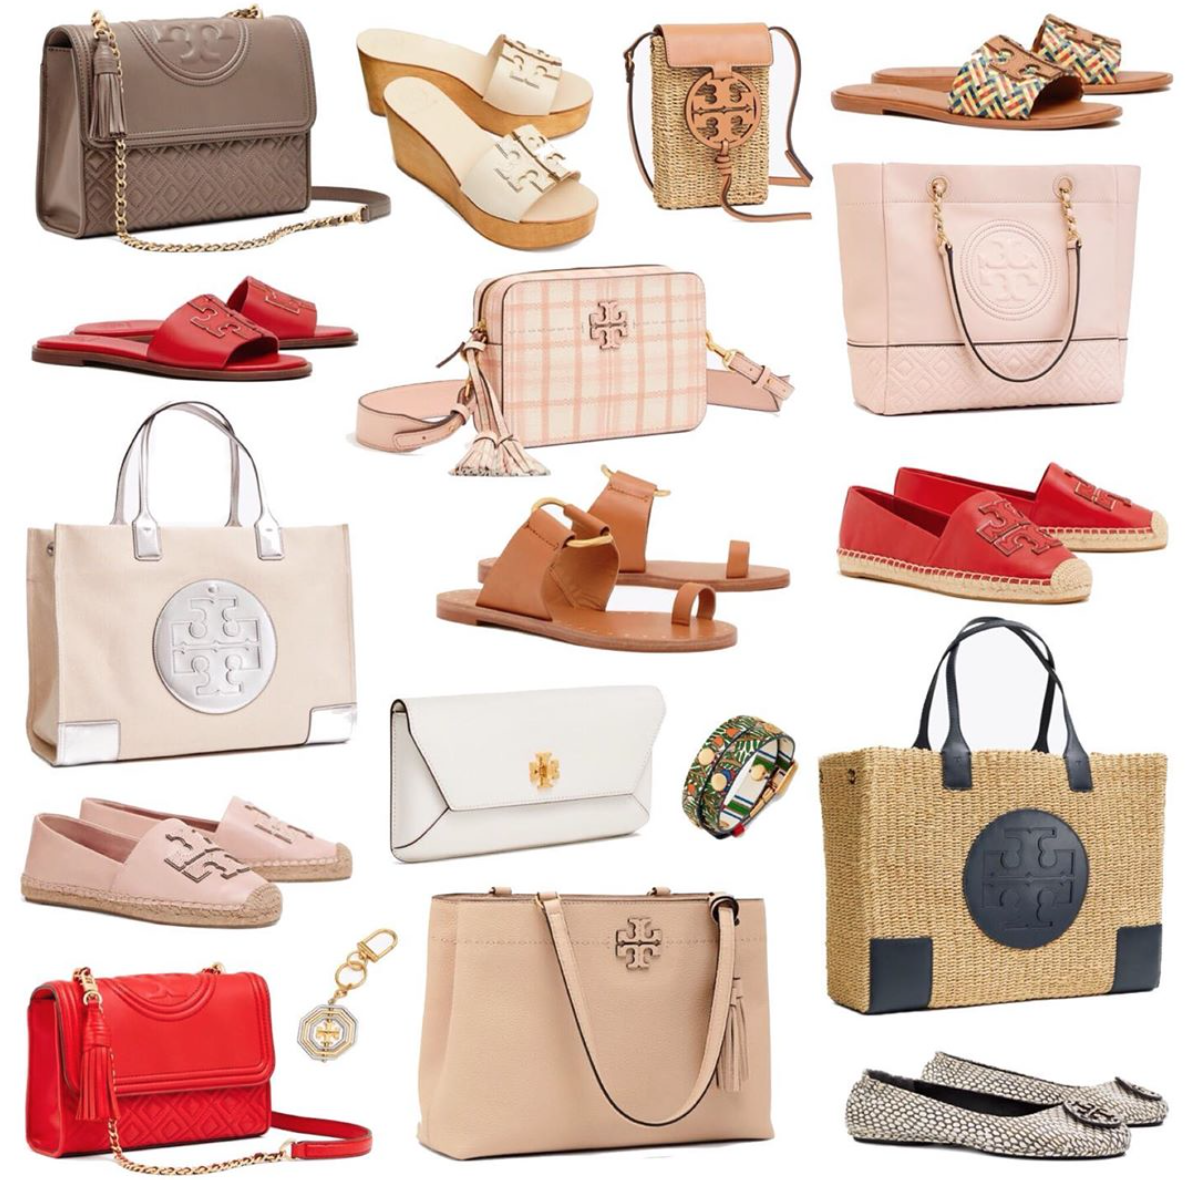 Tory Burch Semi-Annual Sale | Extra 25% Off Starts Now! - The Double Take  Girls